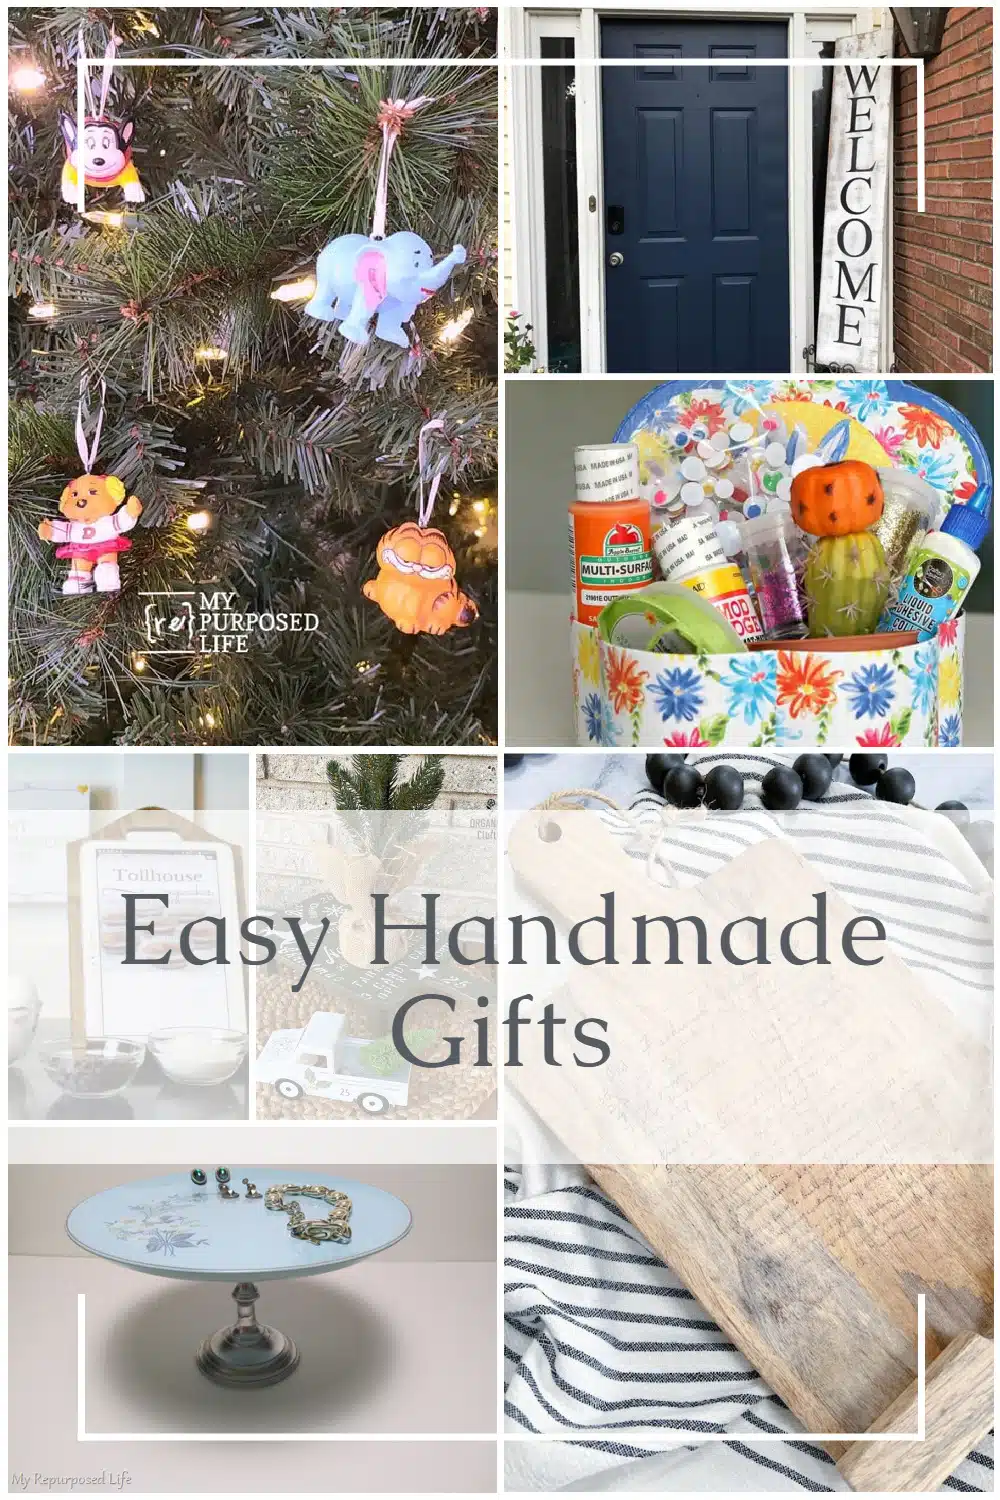 A fun collection of easy handmade gift ideas to use as hostess gifts, neighbor gifts, and family gifts. Nearly 50 ideas to inspire your creativity and up your gift giving game. #MyRepurposedLife #giftideas via @repurposedlife